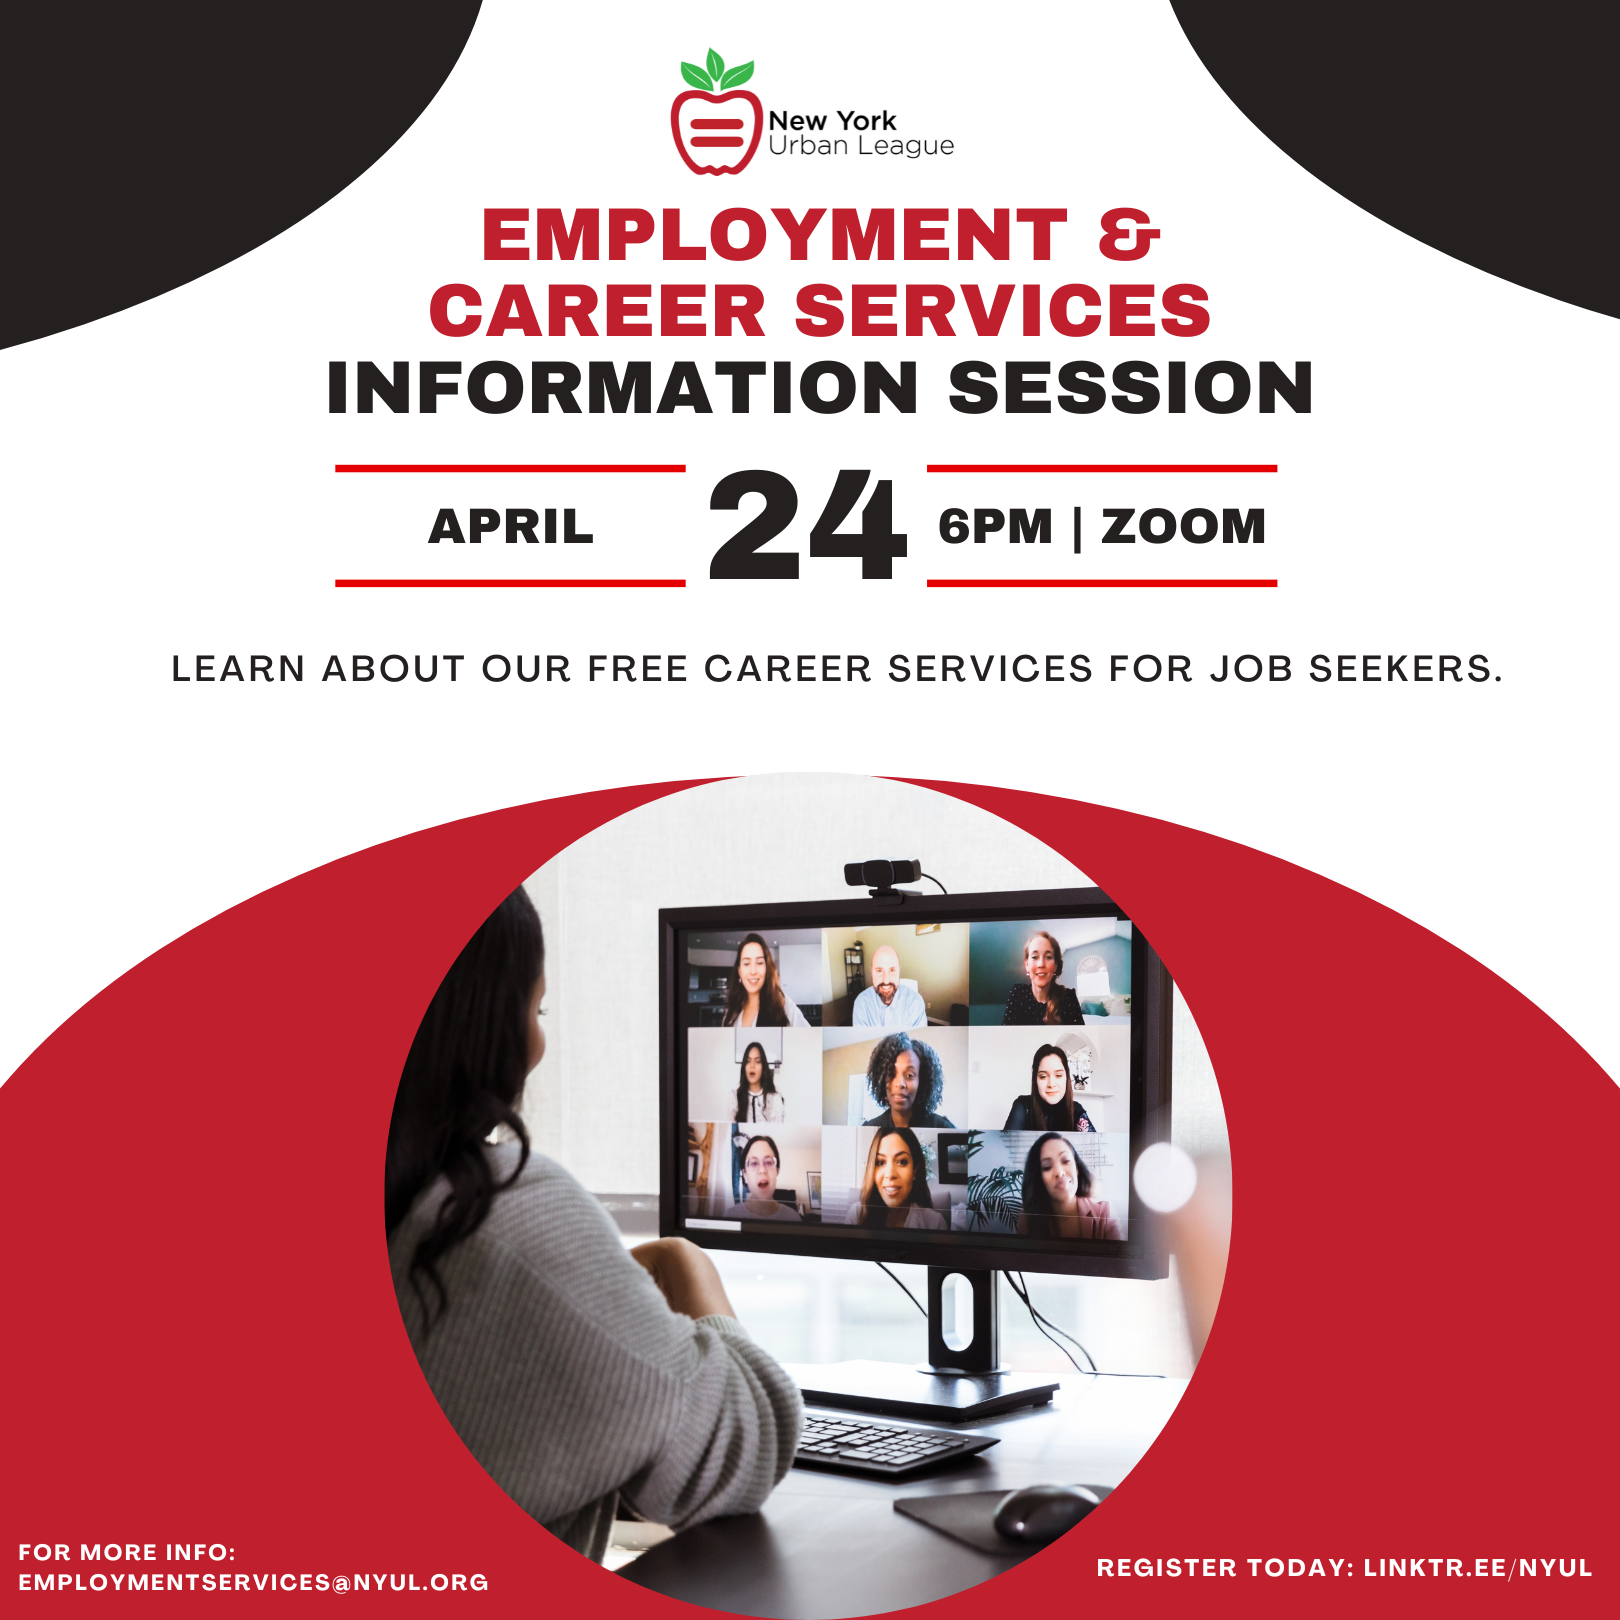 New York Urban League Employment & Career Services Information Session